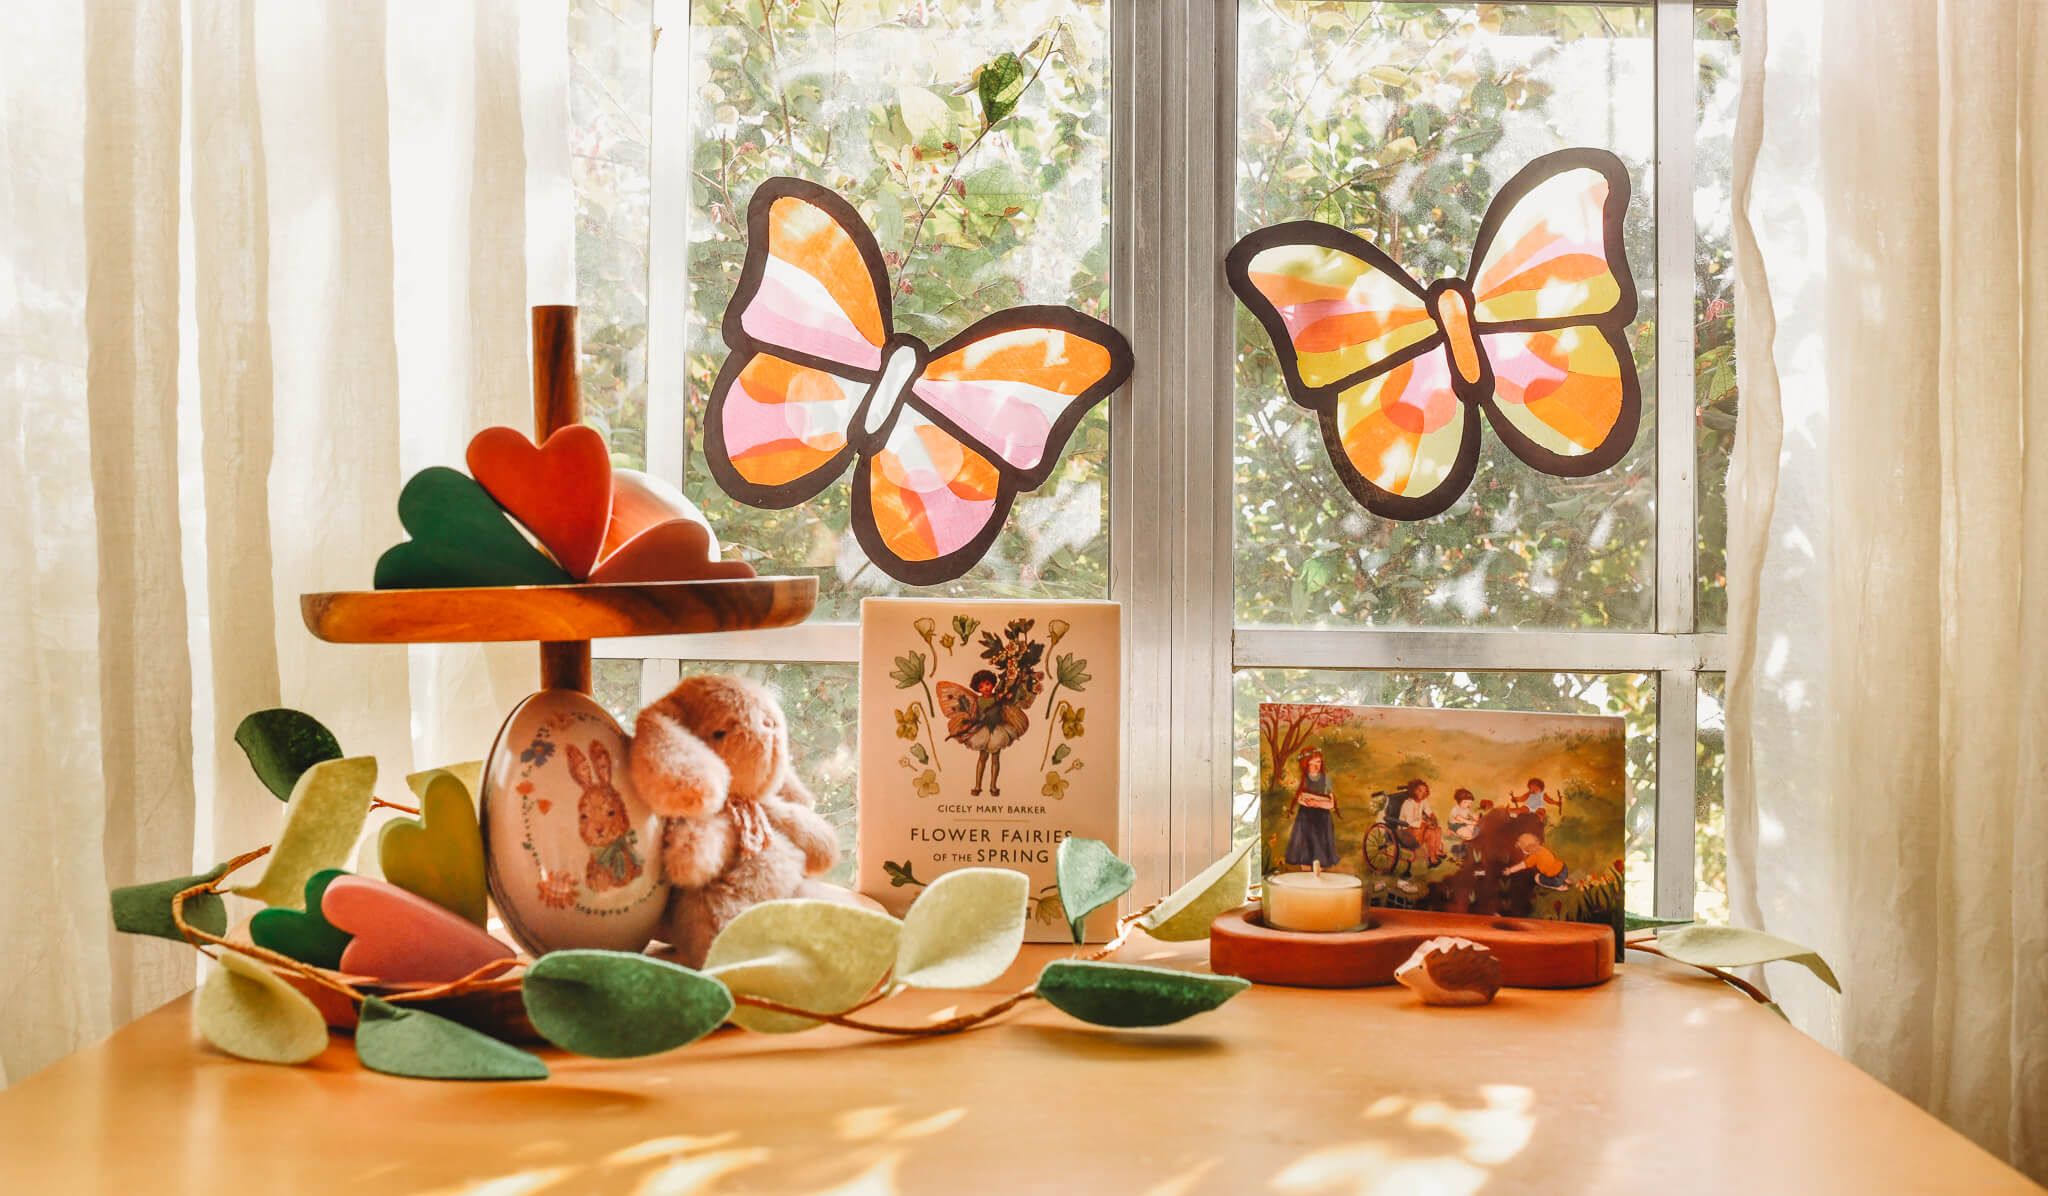 Craft a Spring Butterfly Waldorf Window Transparency